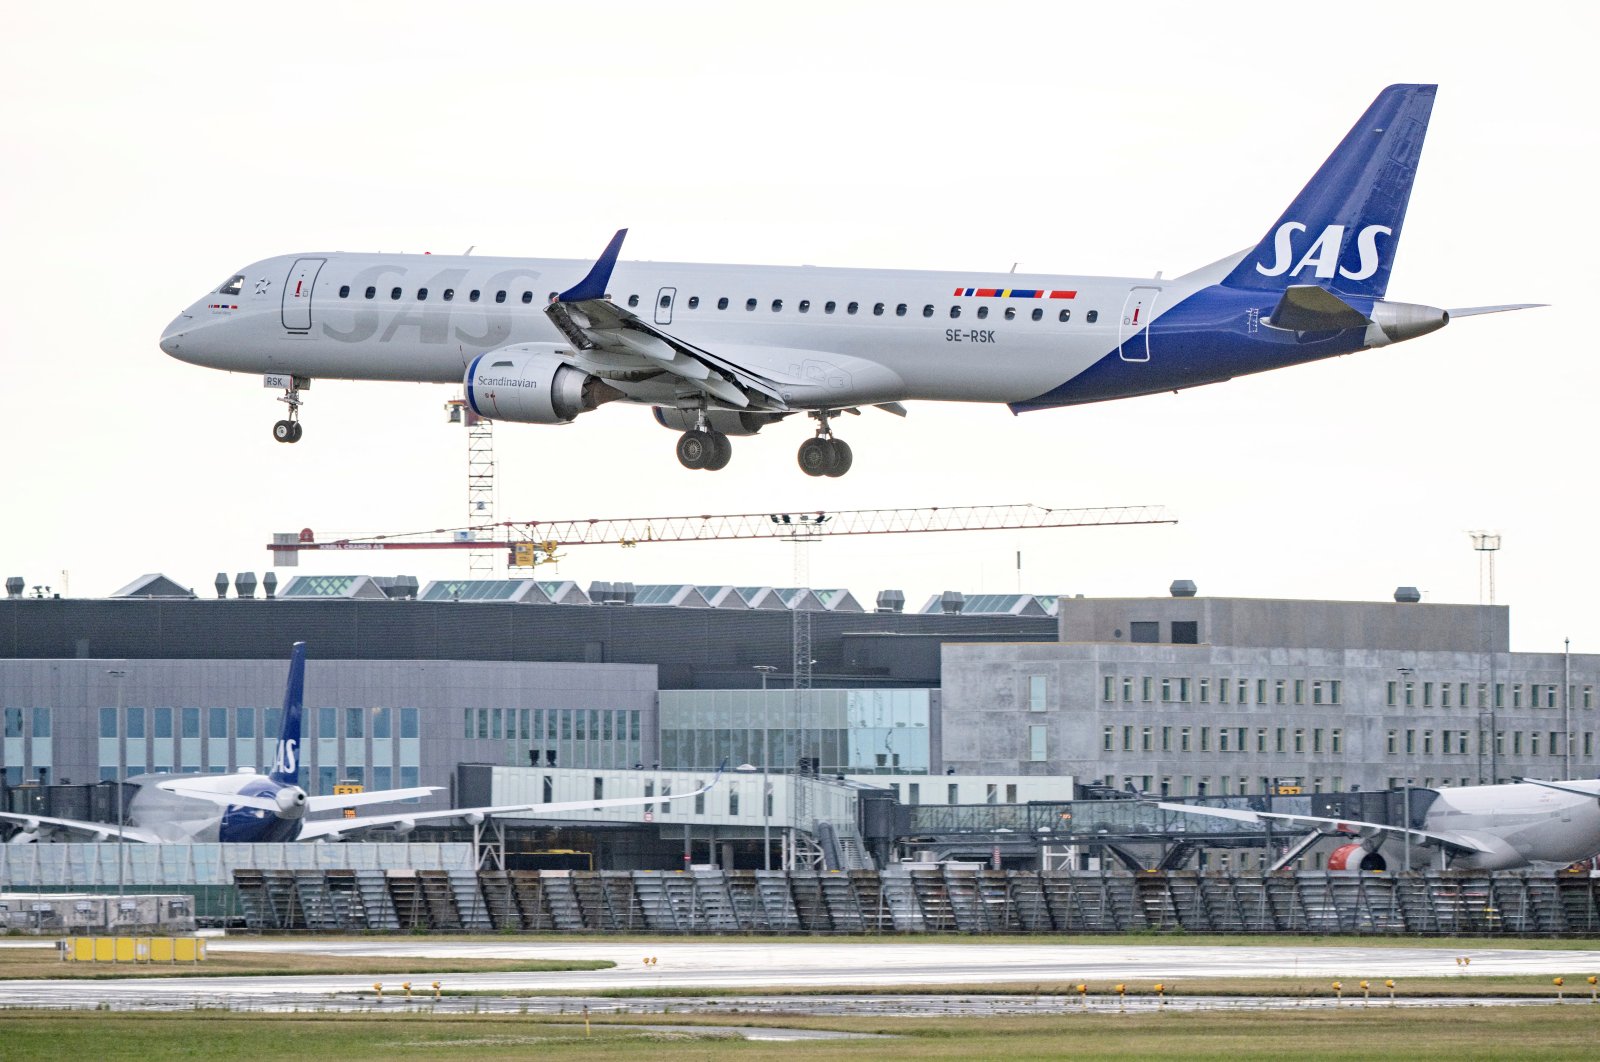 SAS Link&#039;s Embraer E195 aircraft lands at Kastrup Airport, as pilots of Scandinavian Airlines go on strike, in Kastrup, Denmark, July 4, 2022. (Reuters Photo)